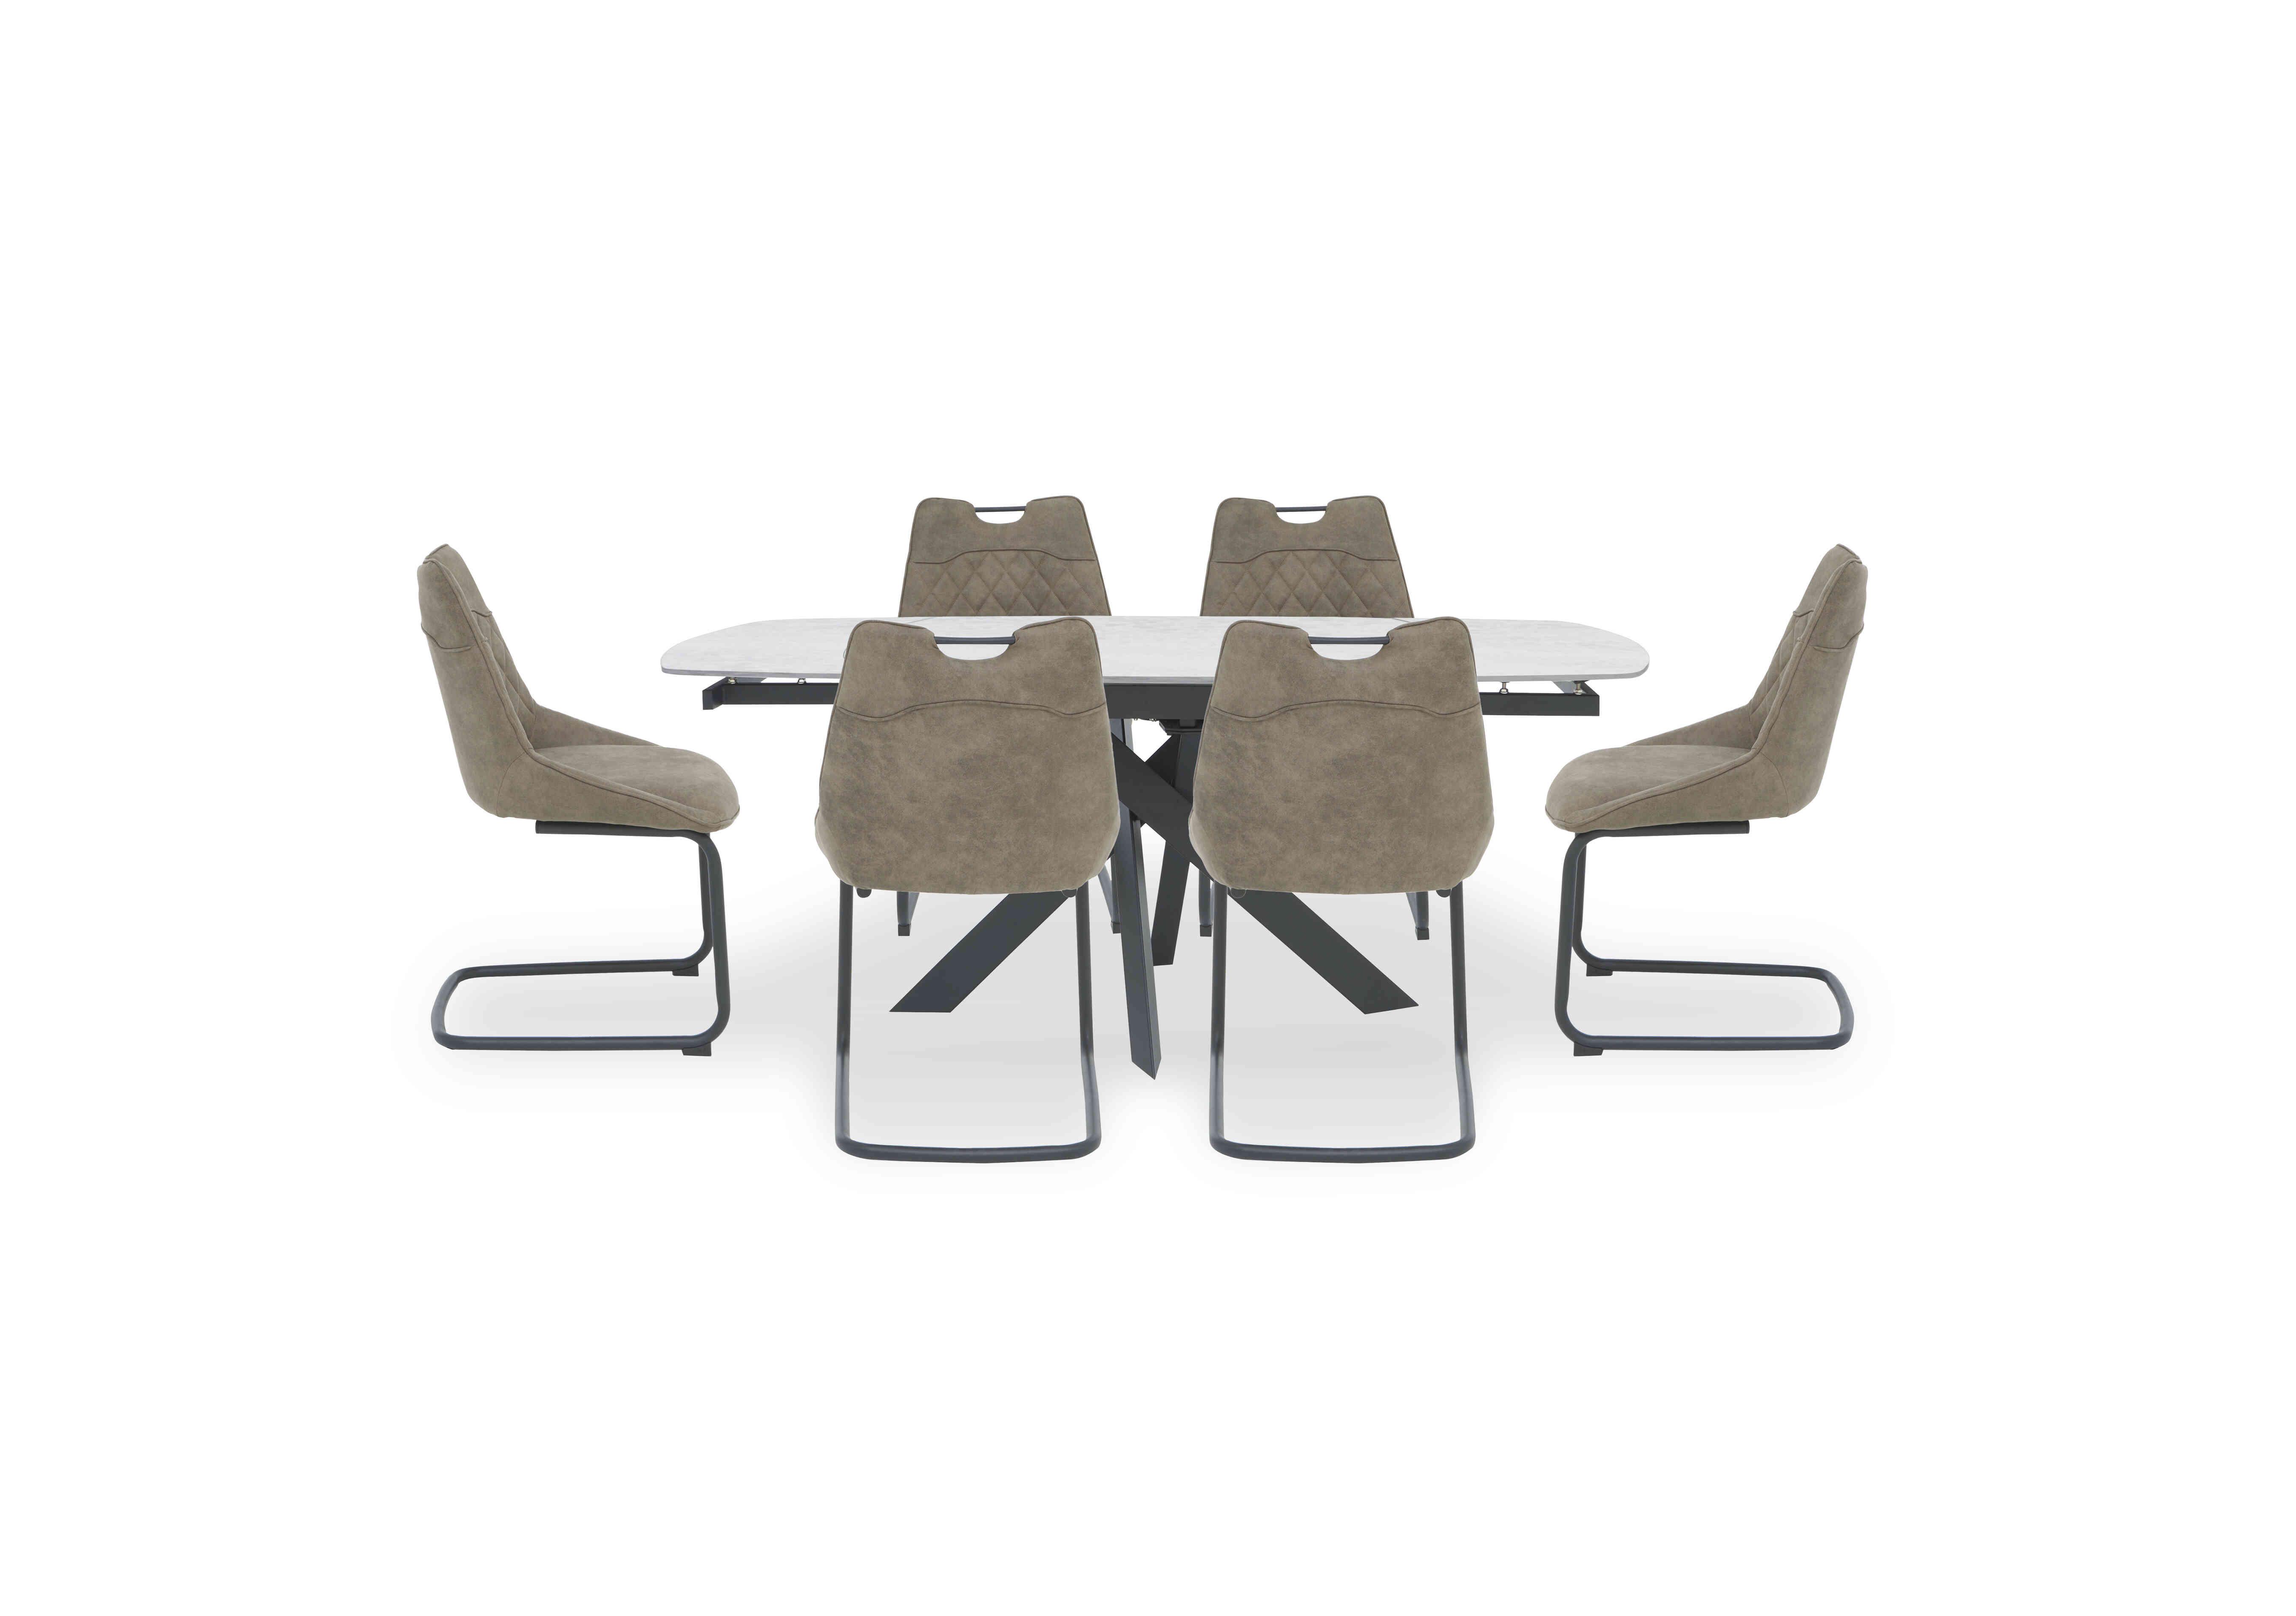 Warrior Crystal White Swivel Extending Dining Table with 6 Cantilever Dining Chairs in White/Taupe on Furniture Village